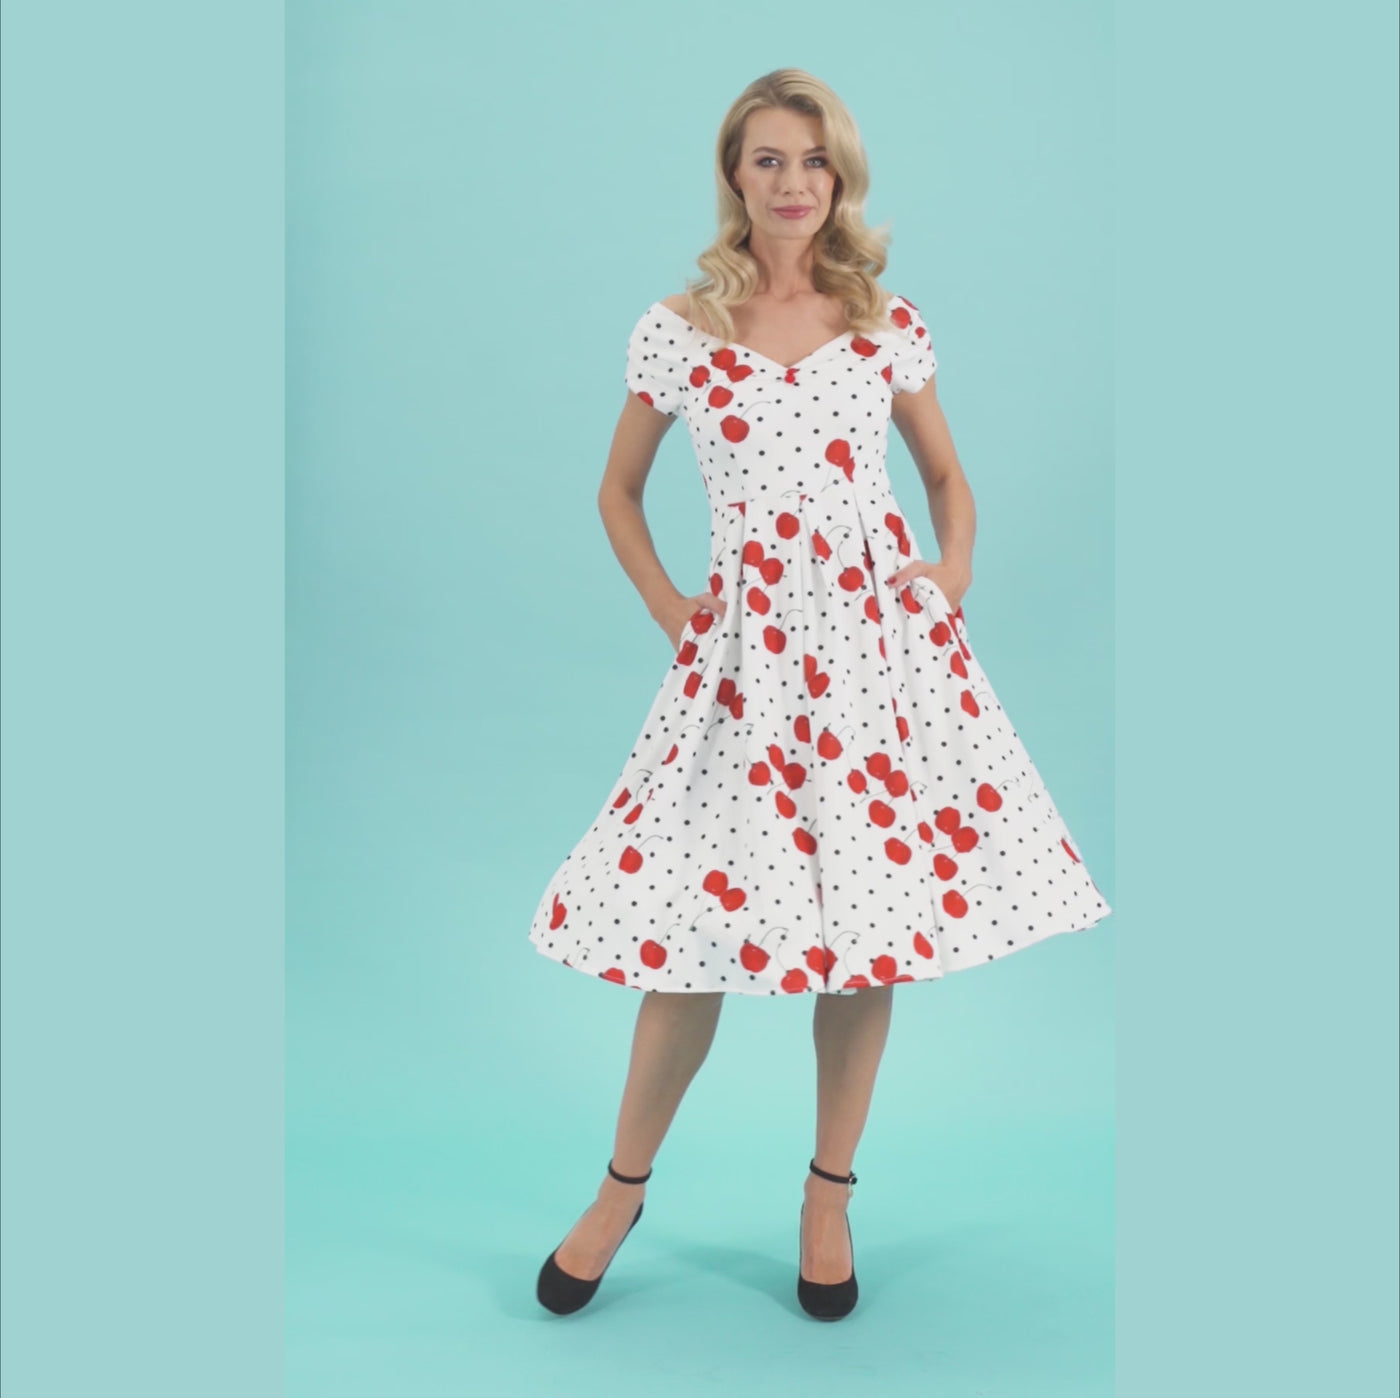 Video of a woman wearing our Lily Rockabilly Polka & Cherry White Swing Dress.